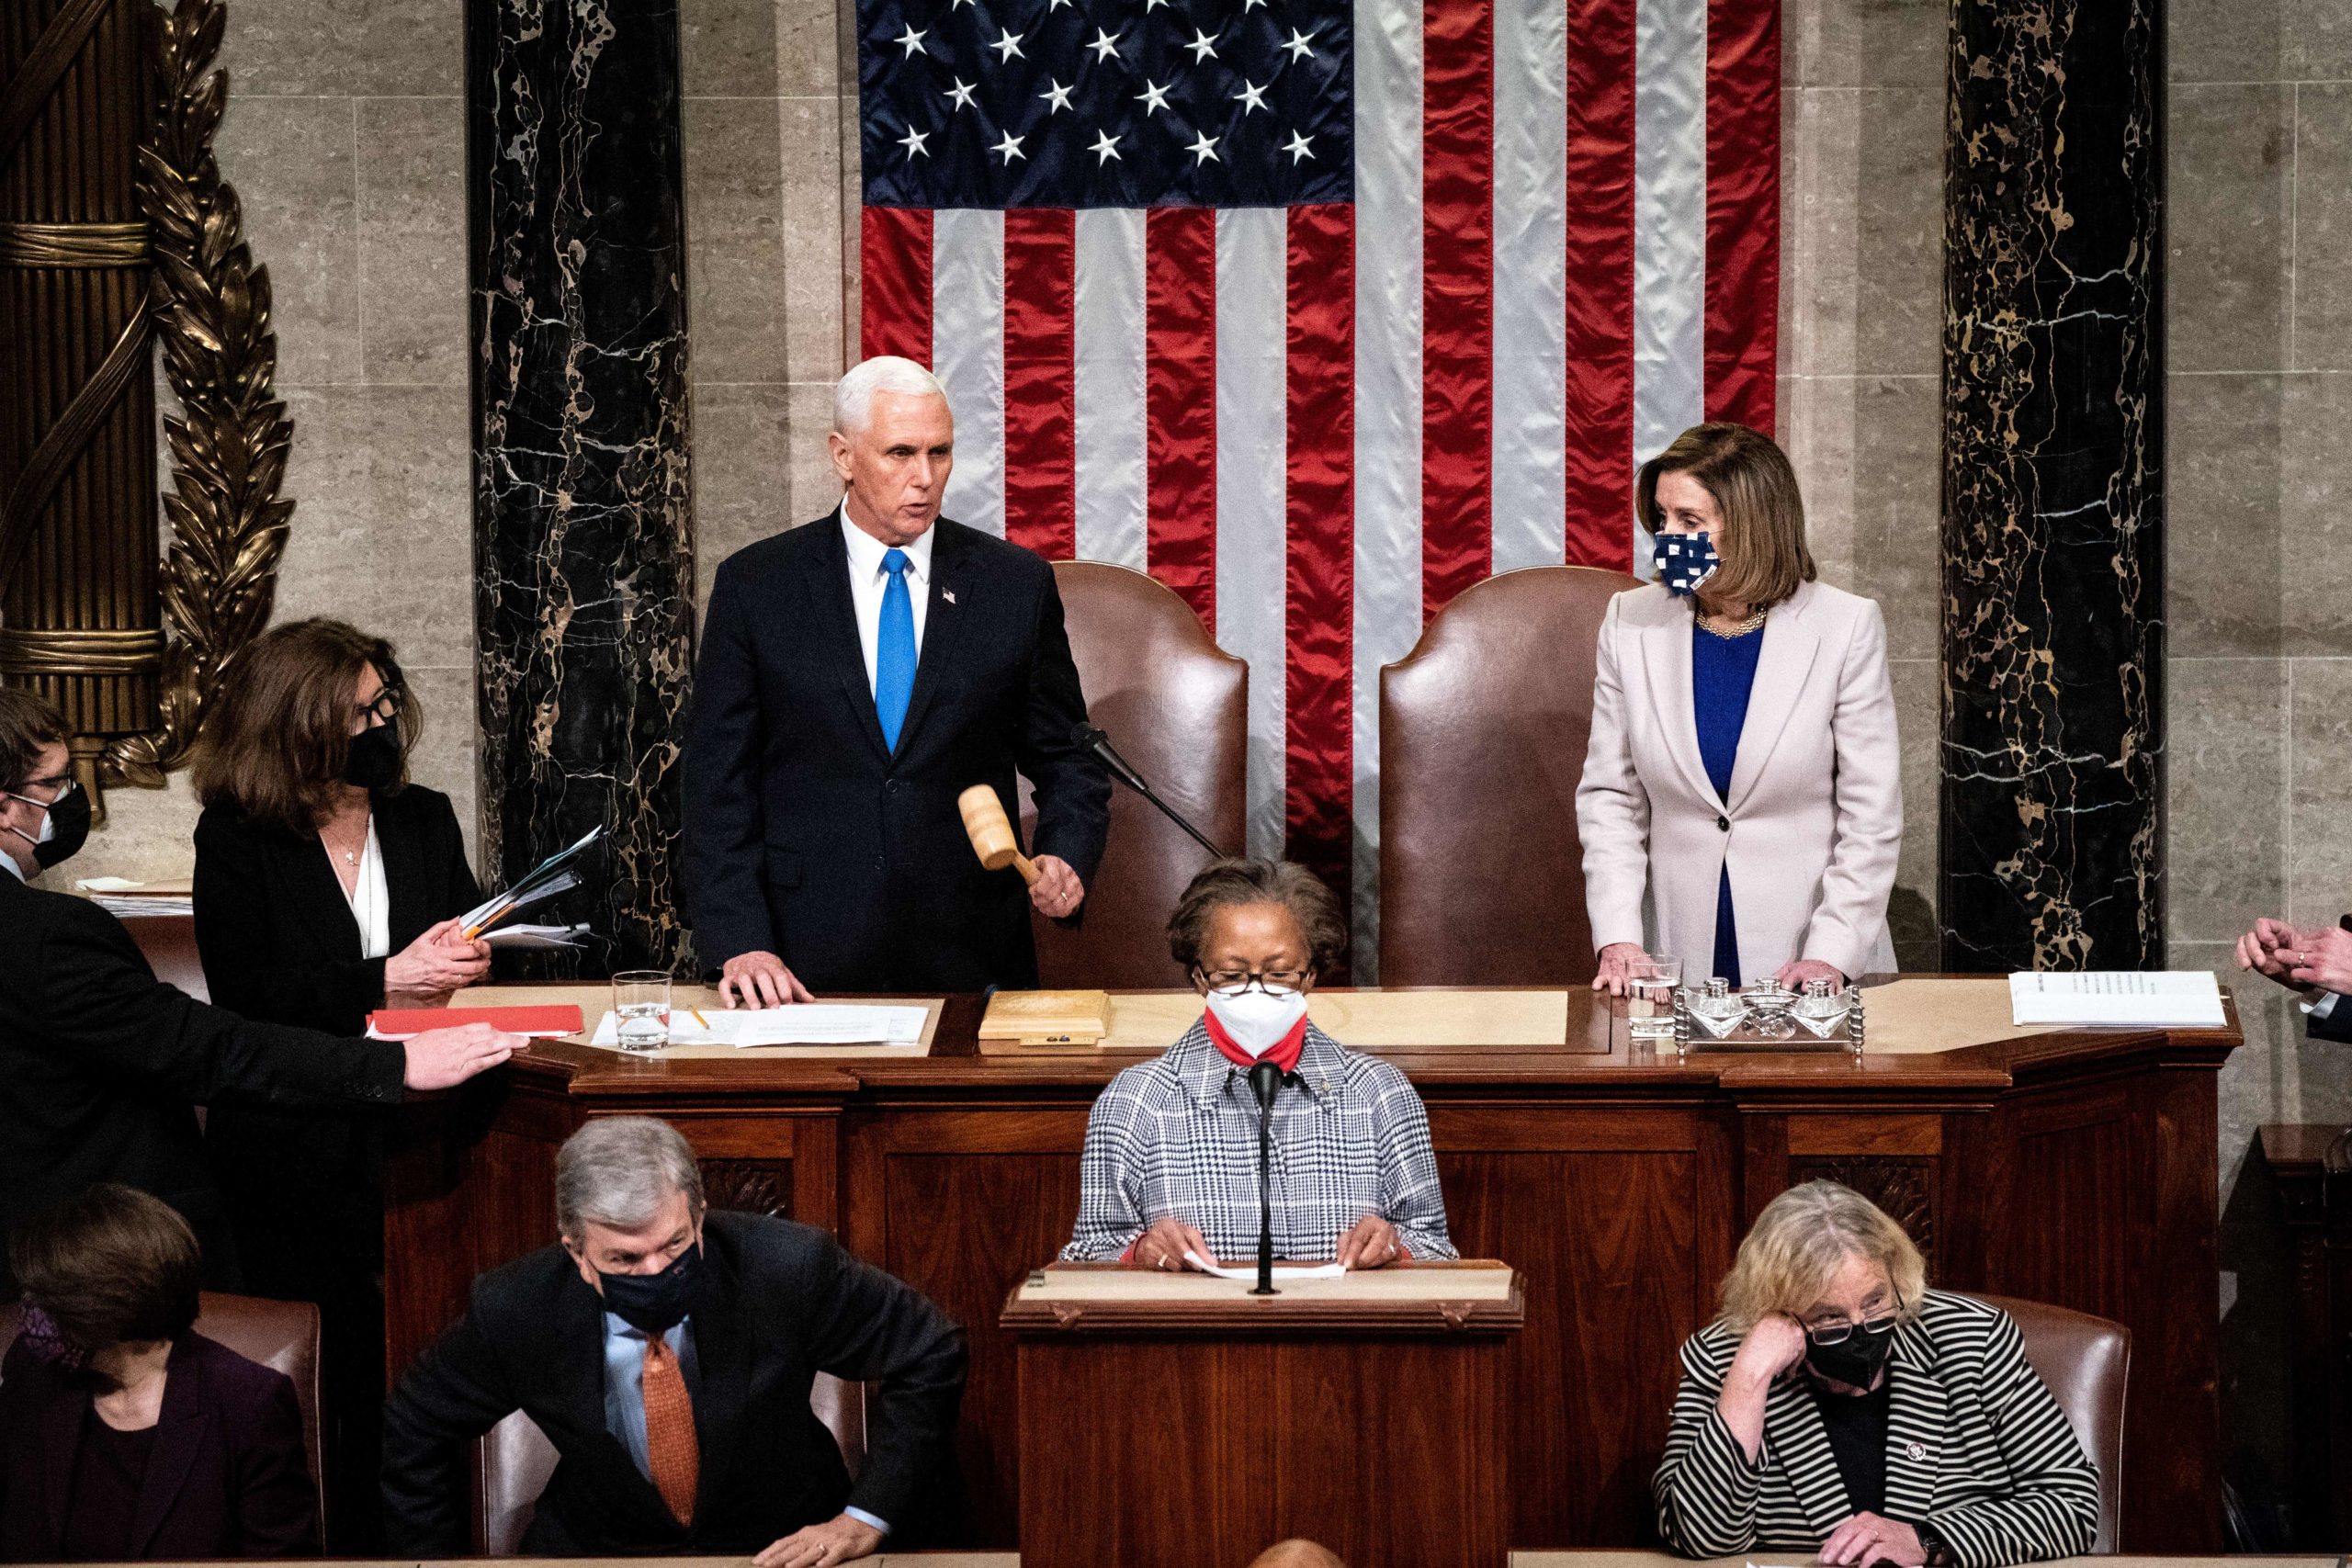 TOPSHOT - Vice President Mike Pence and House Speaker Nancy Pelosi preside over a Joint session of Congress to certify the 2020 Electoral College results after supporters of President Donald Trump stormed the Capitol earlier in the day on Capitol Hill in Washington, DC on January 6, 2021. - Members of Congress returned to the House Chamber after being evacuated when protesters stormed the Capitol and disrupted a joint session to ratify President-elect Joe Biden's 306-232 Electoral College win over President Donald Trump. (Photo by Erin Schaff / POOL / AFP) (Photo by ERIN SCHAFF/POOL/AFP via Getty Images)